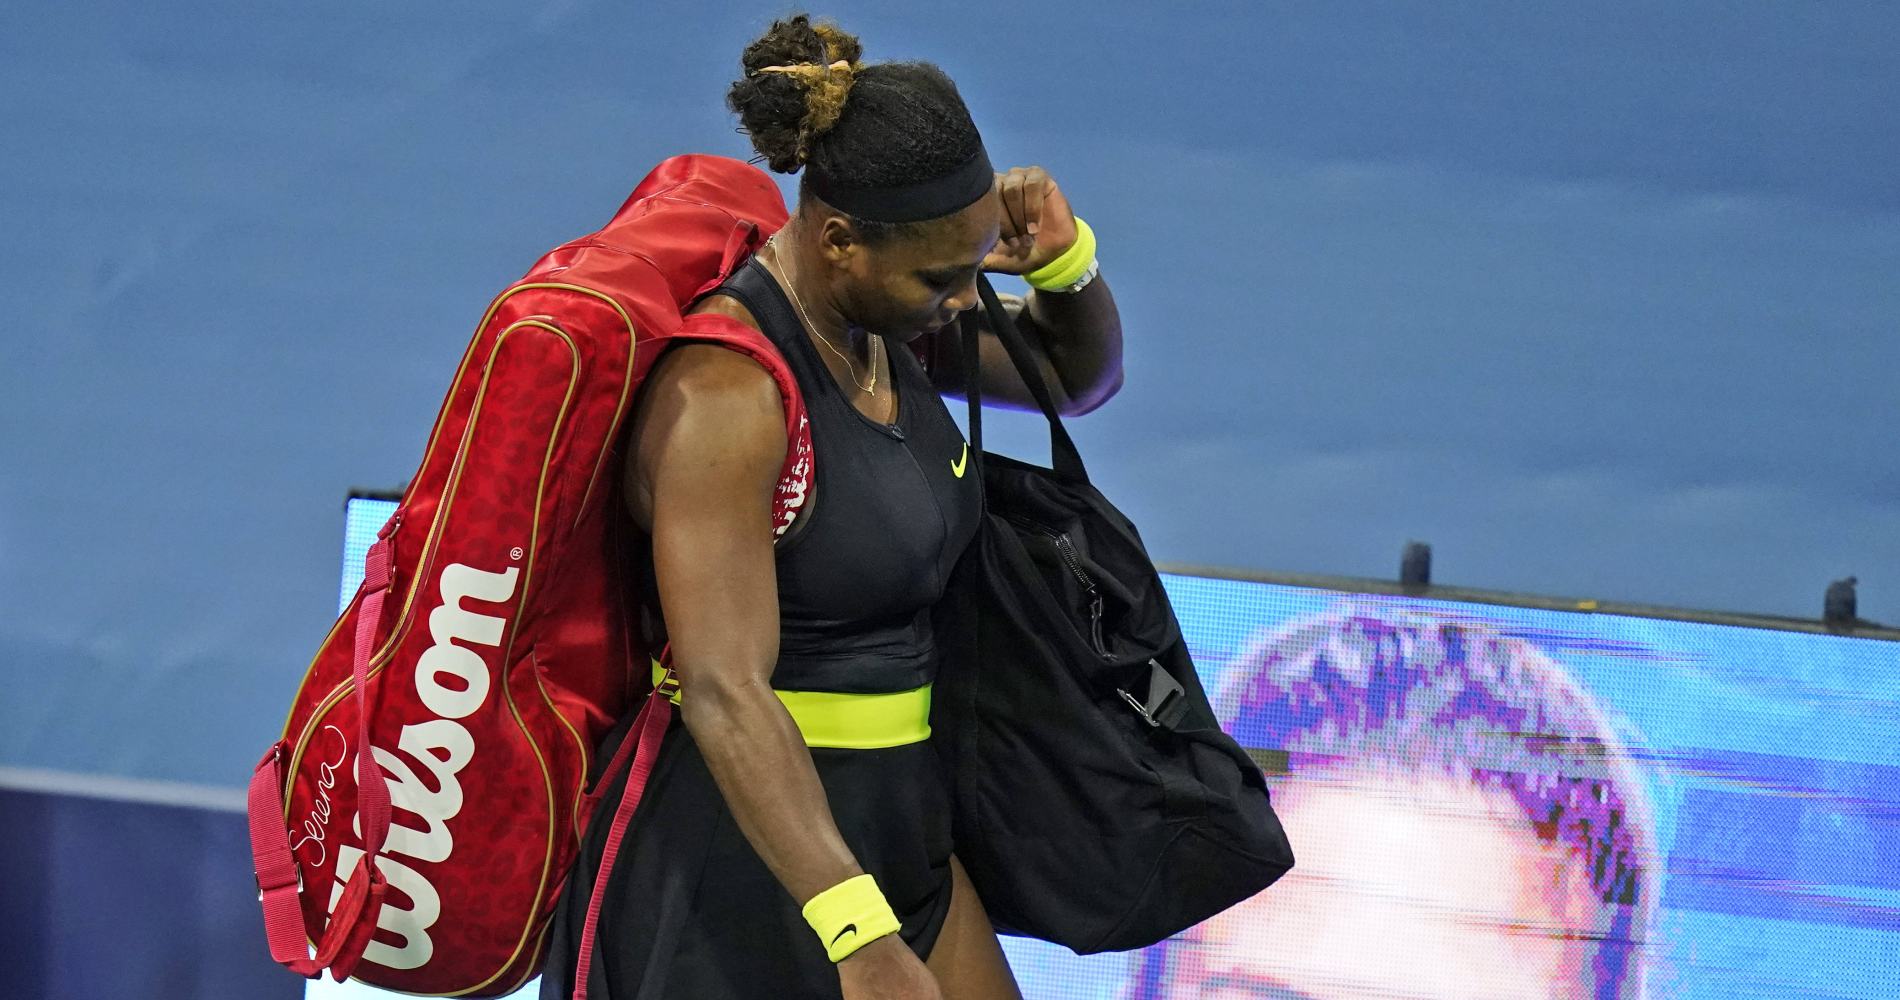 Serena Williams, Western & Southern Open (New York / Flushing Meadows), 2020